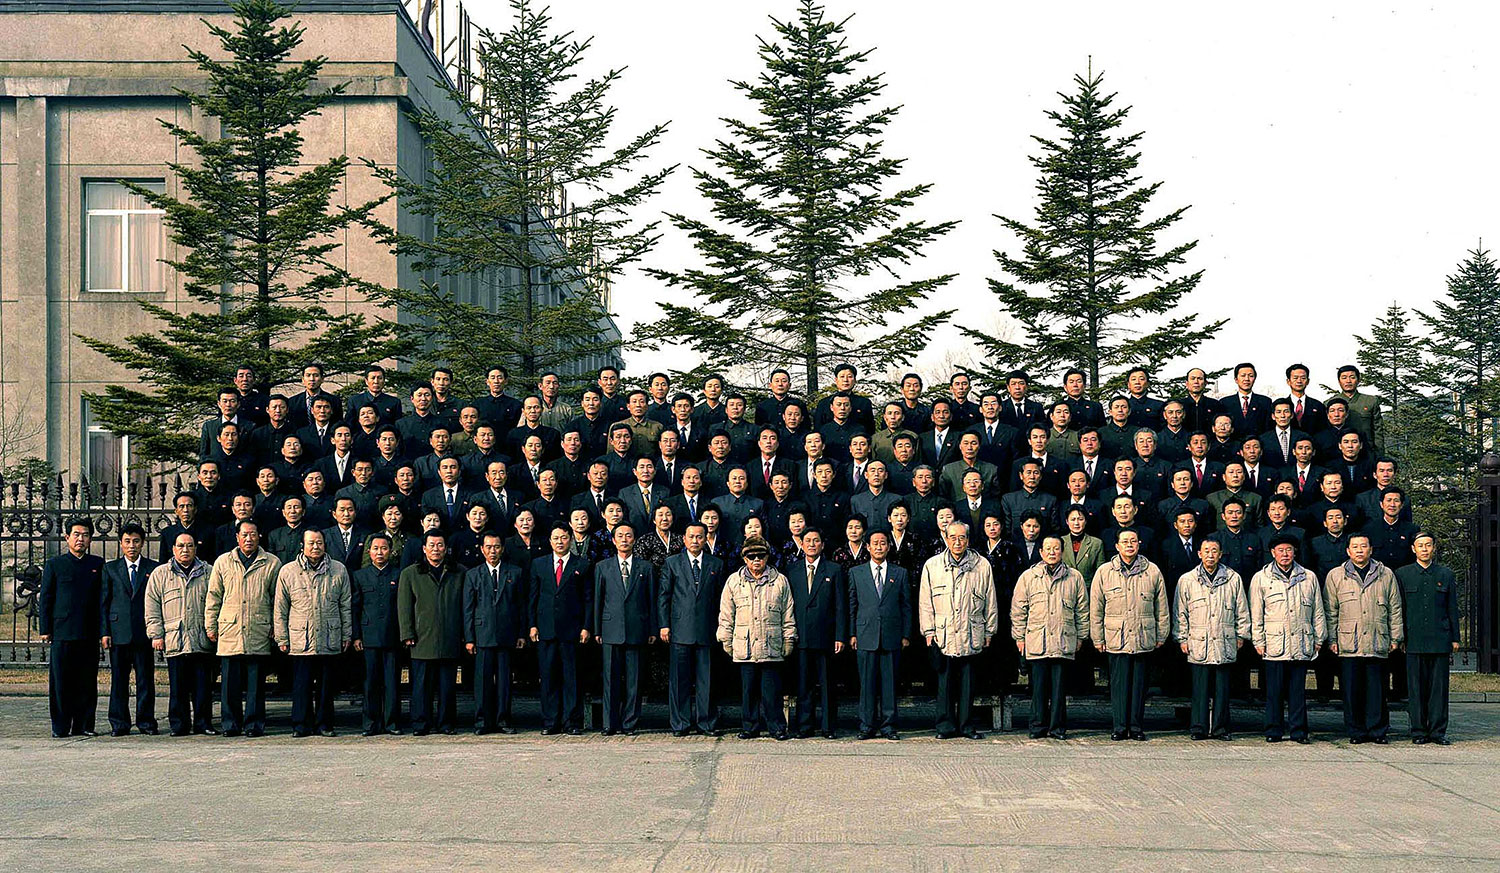 This undated photo, released by KCNA on Dec. 7, 2010, shows Kim Jong Il (center, in sunglasses) posing with employees during his visit to the Kim Chaek Iron and Steel Complex in North Hamgyong Province.